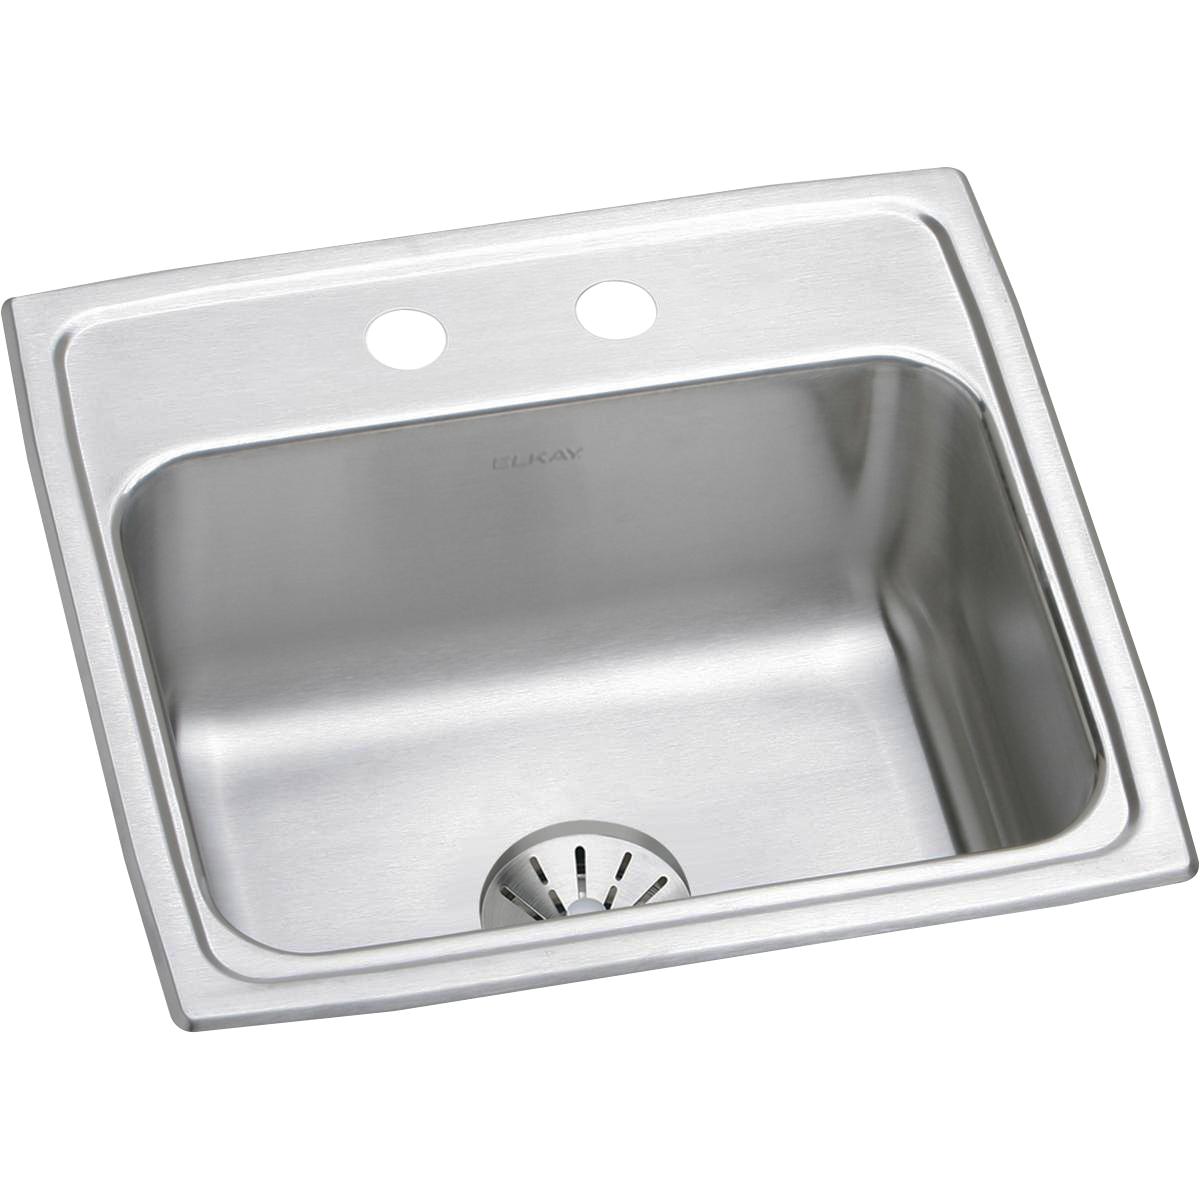 Elkay Lustertone Classic 19-1/2" x 19" x 7-1/2" Single Bowl Drop-in Sink with Perfect Drain